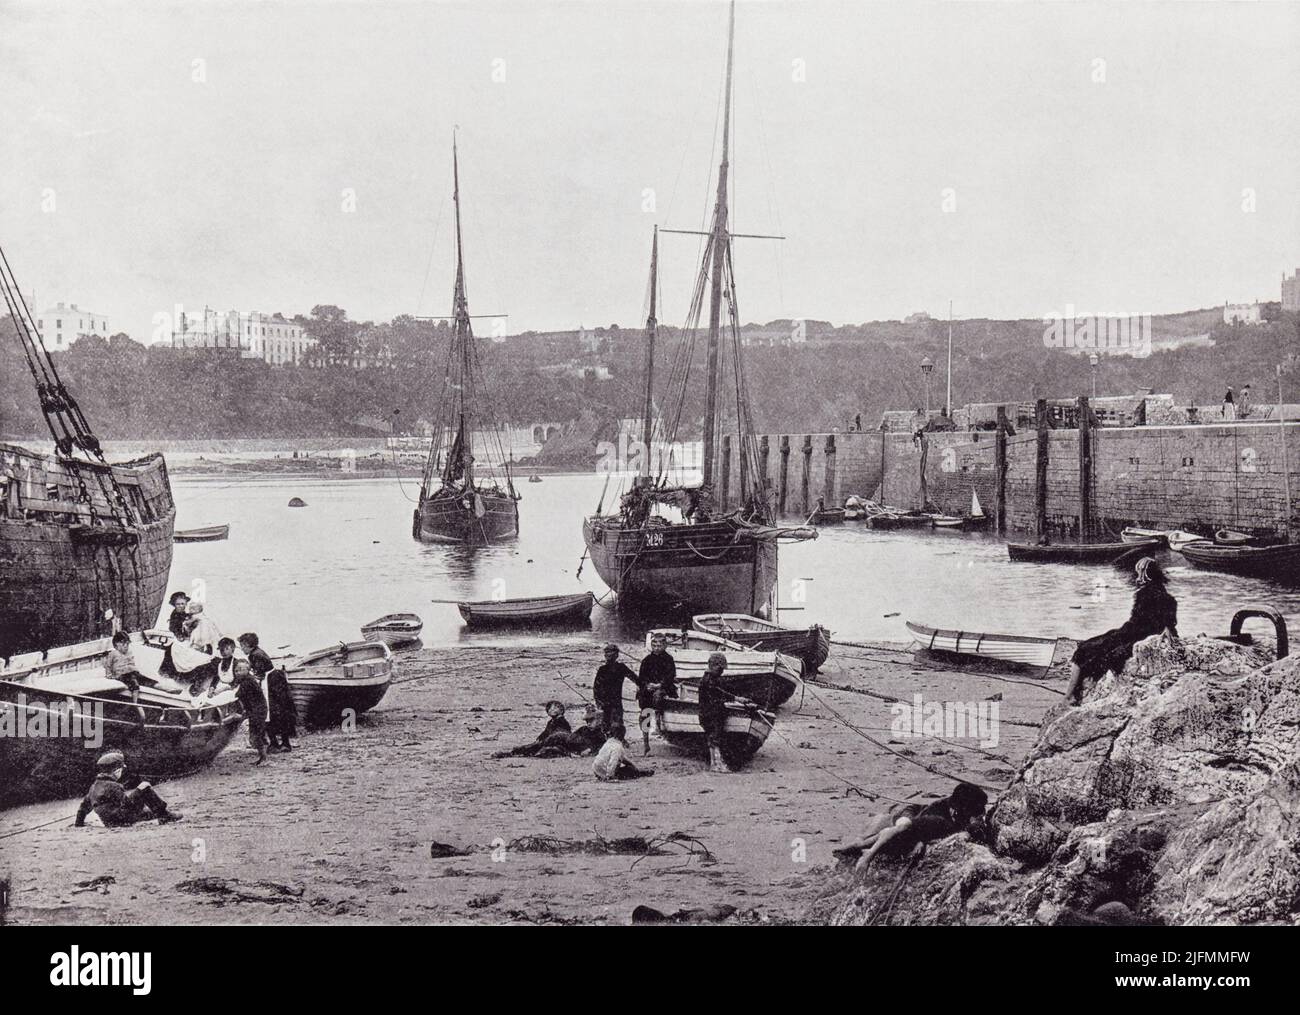 Tenby, Pembrokeshire, Wales.  The harbour seen here in the 19th century.  From Around The Coast,  An Album of Pictures from Photographs of the Chief Seaside Places of Interest in Great Britain and Ireland published London, 1895, by George Newnes Limited. Stock Photo